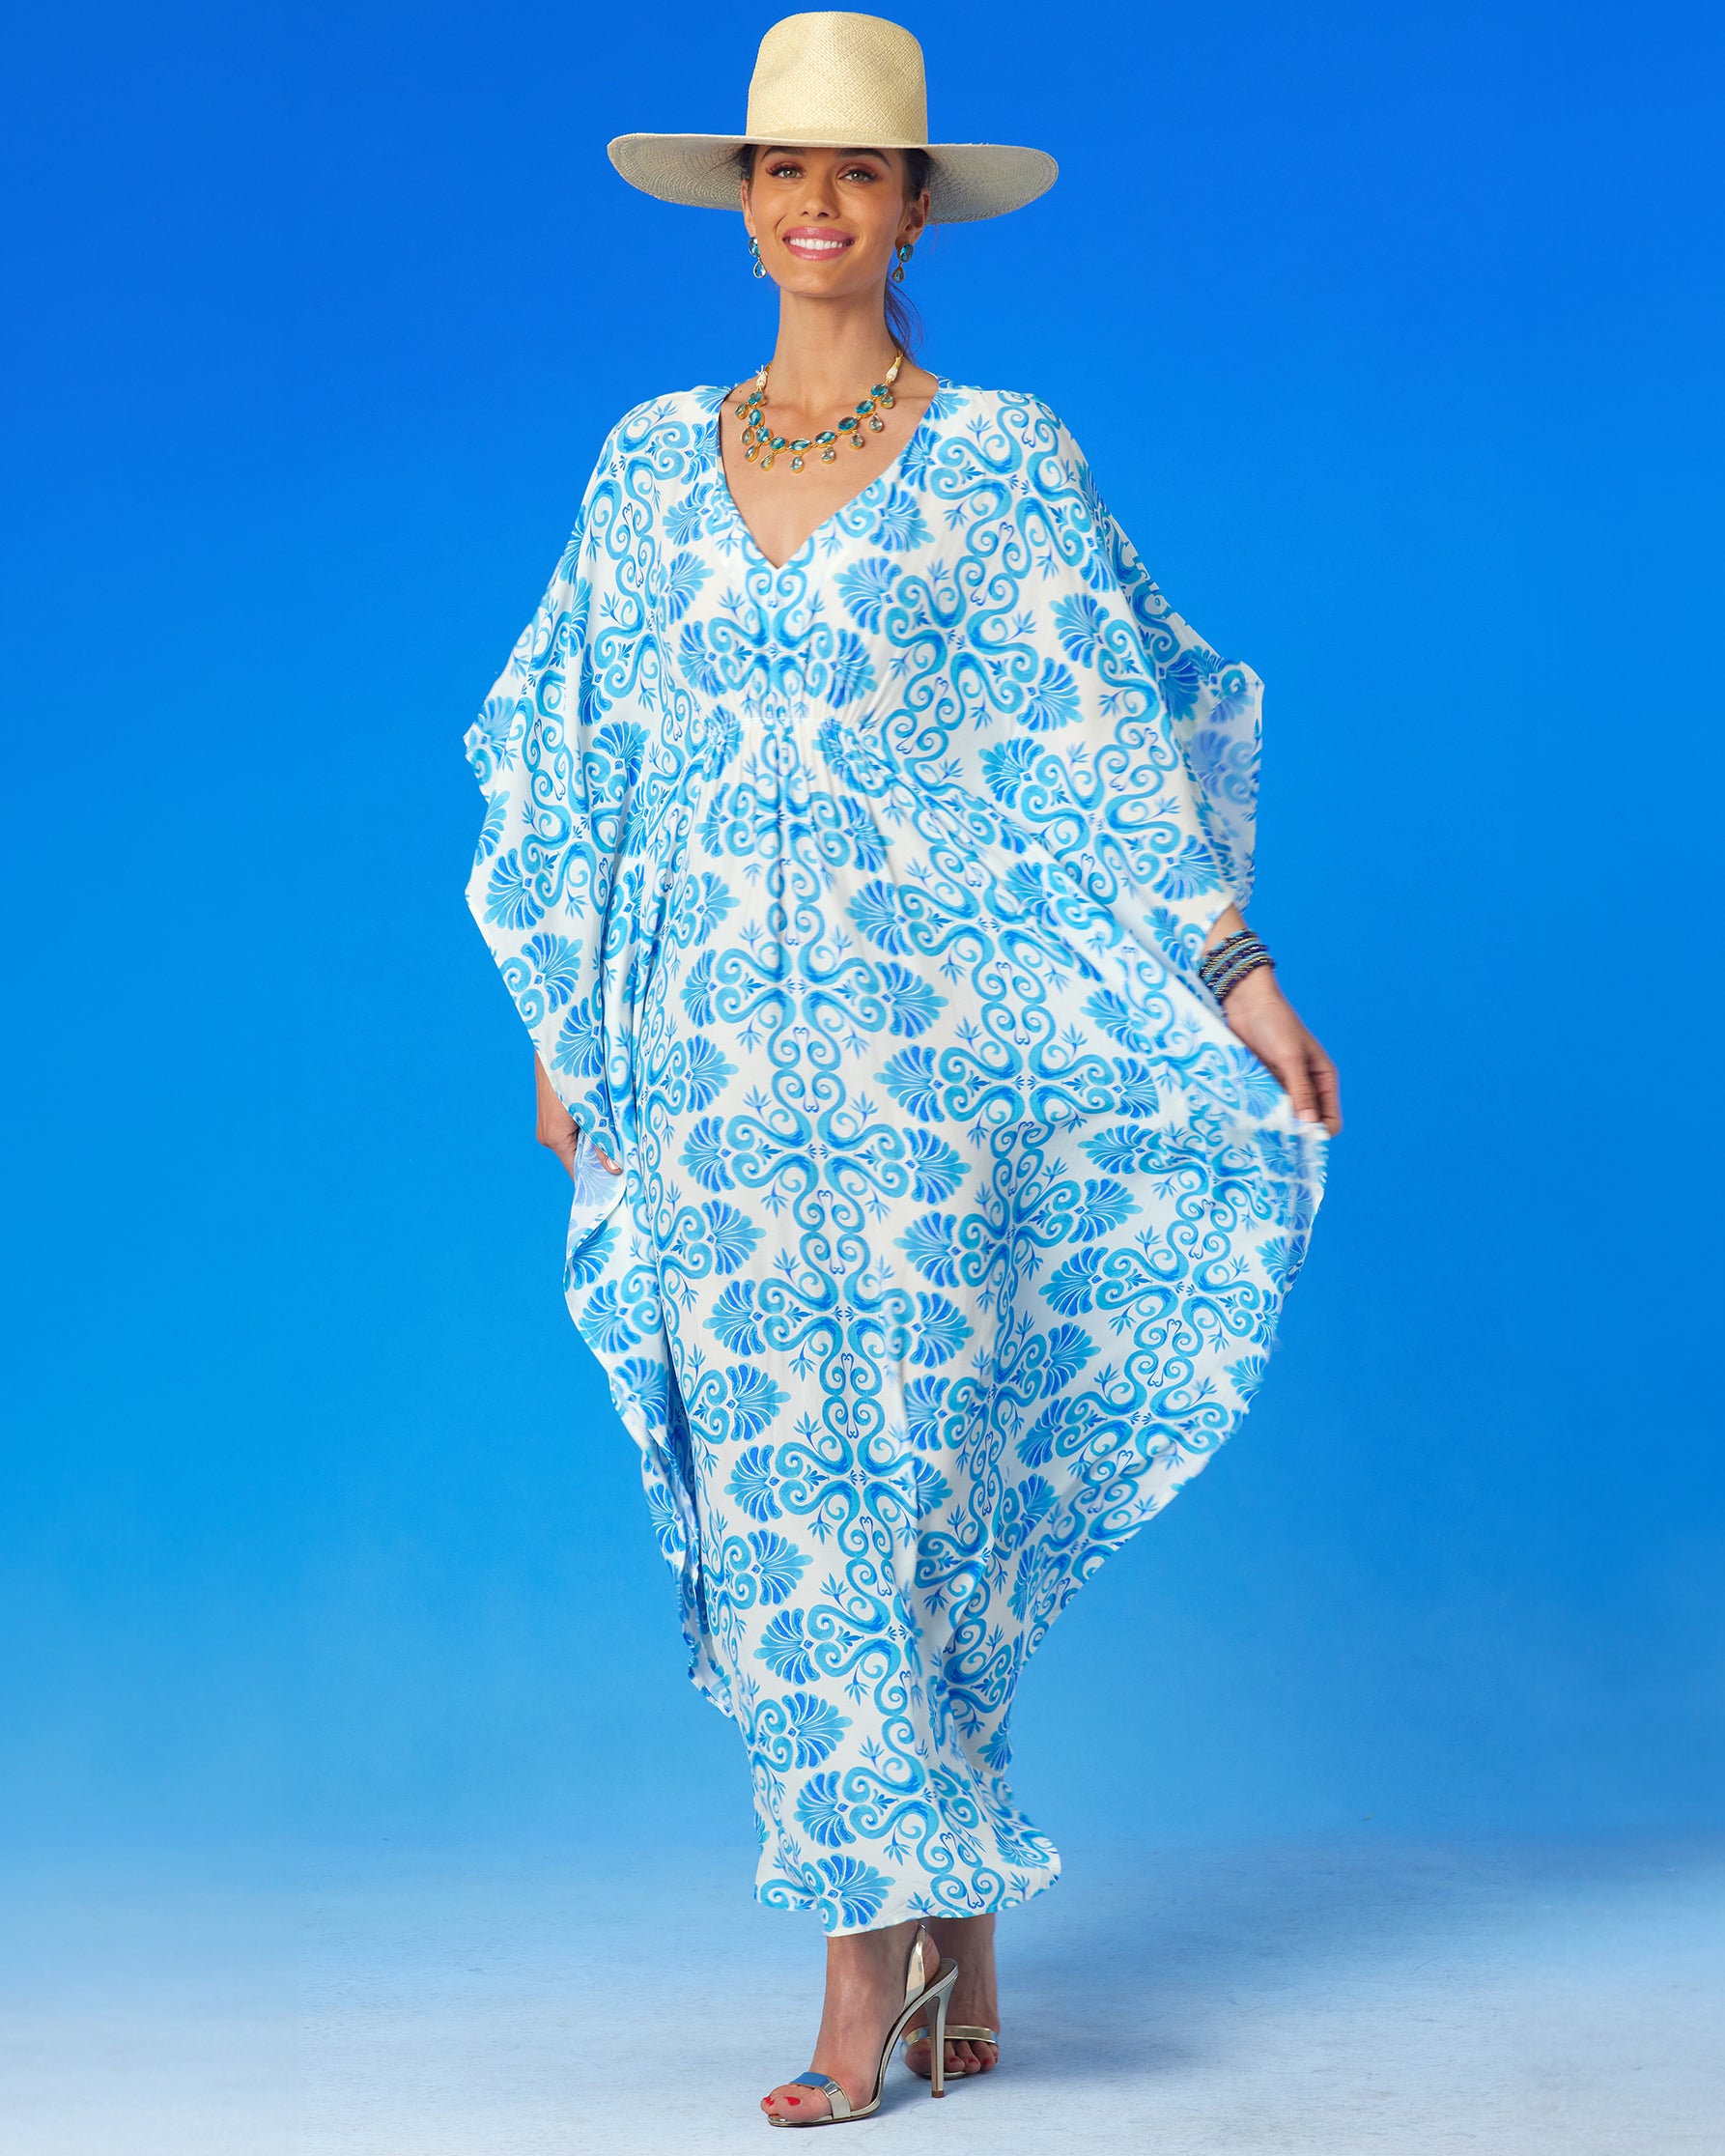 Thetis Cinched Long Kaftan in Blue and White-woman holding the kaftan by the sides and smiling